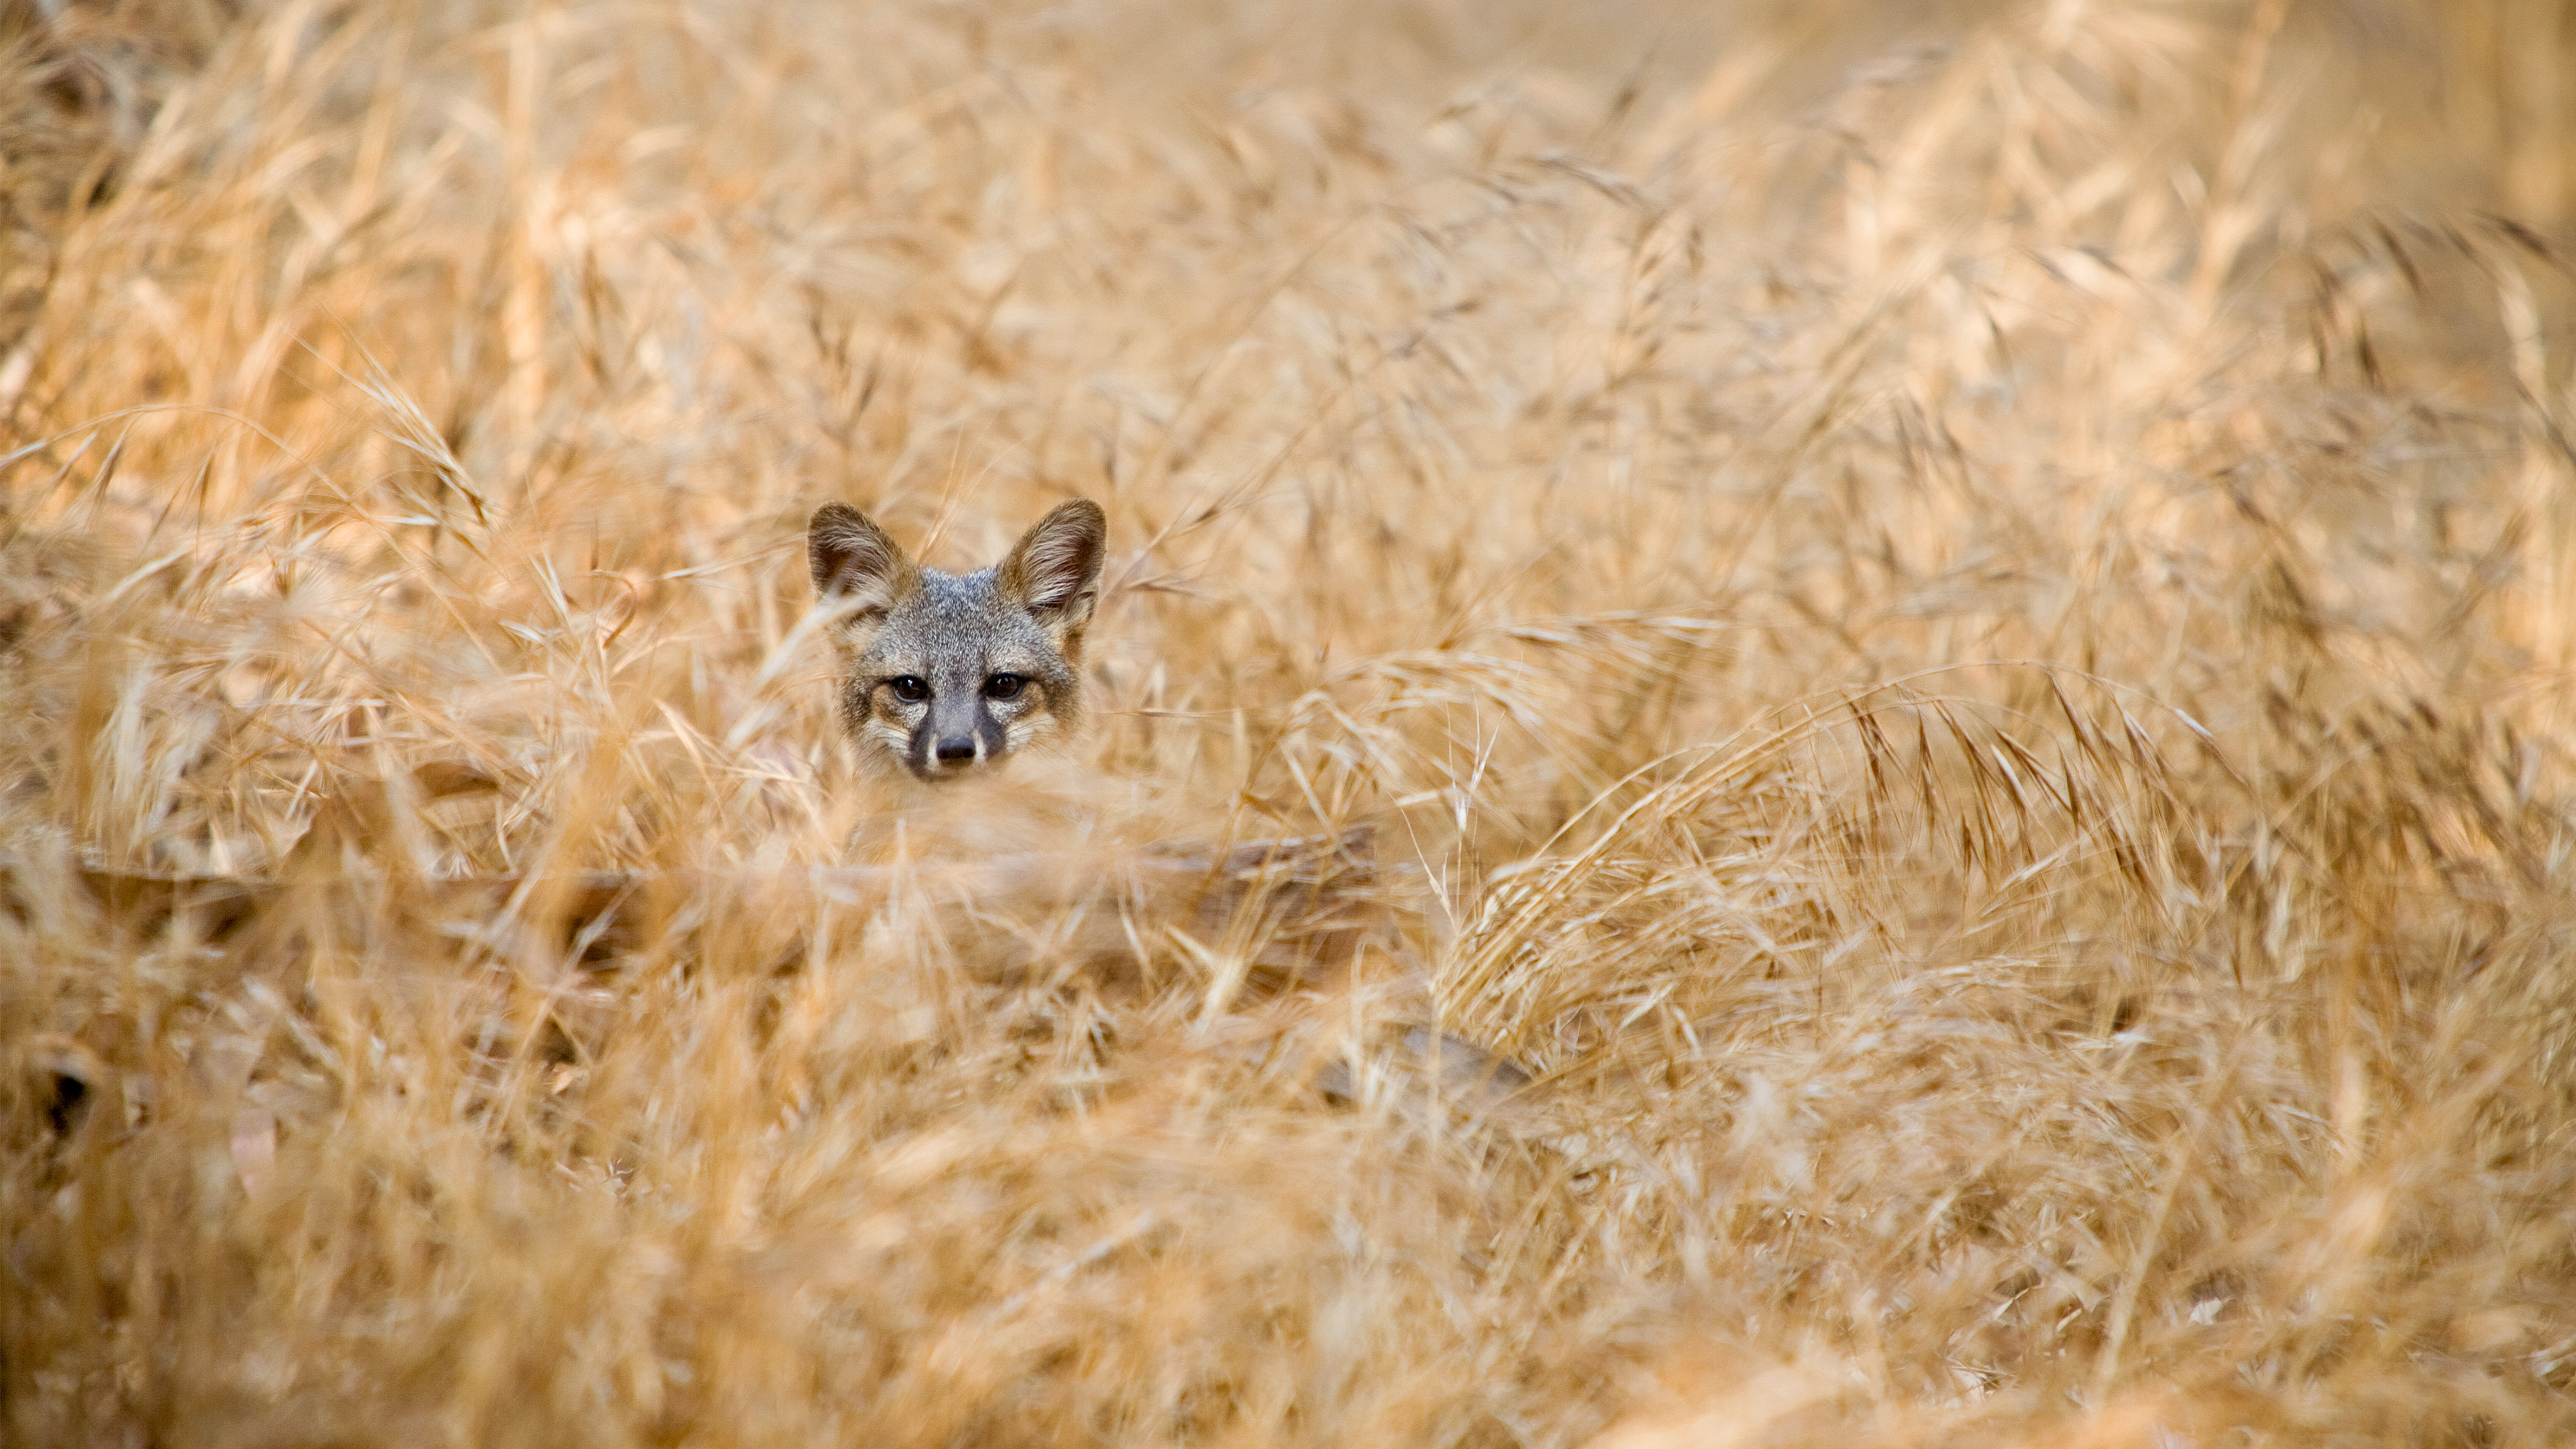 Island fox in Channel Islands National Park, California by Ian Shive